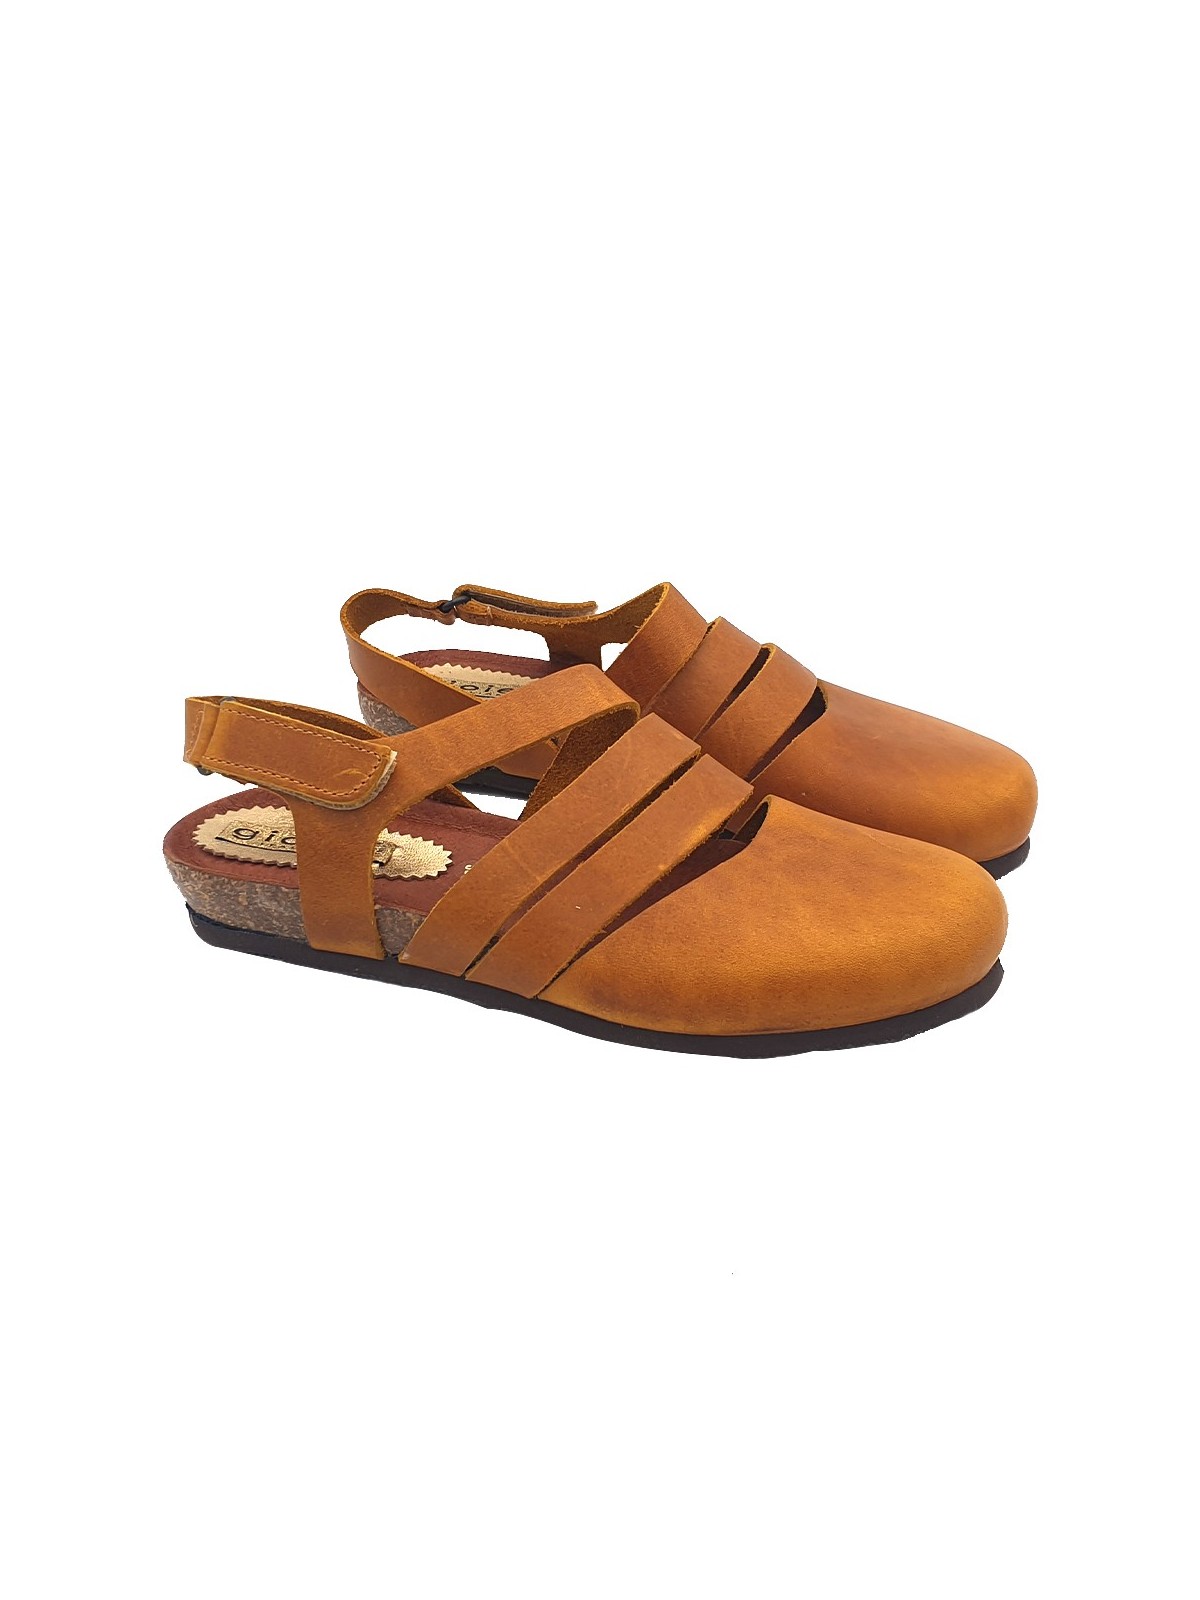 LEATHER YELLOW FLAT SANDALS WITH LEATHER BANDS